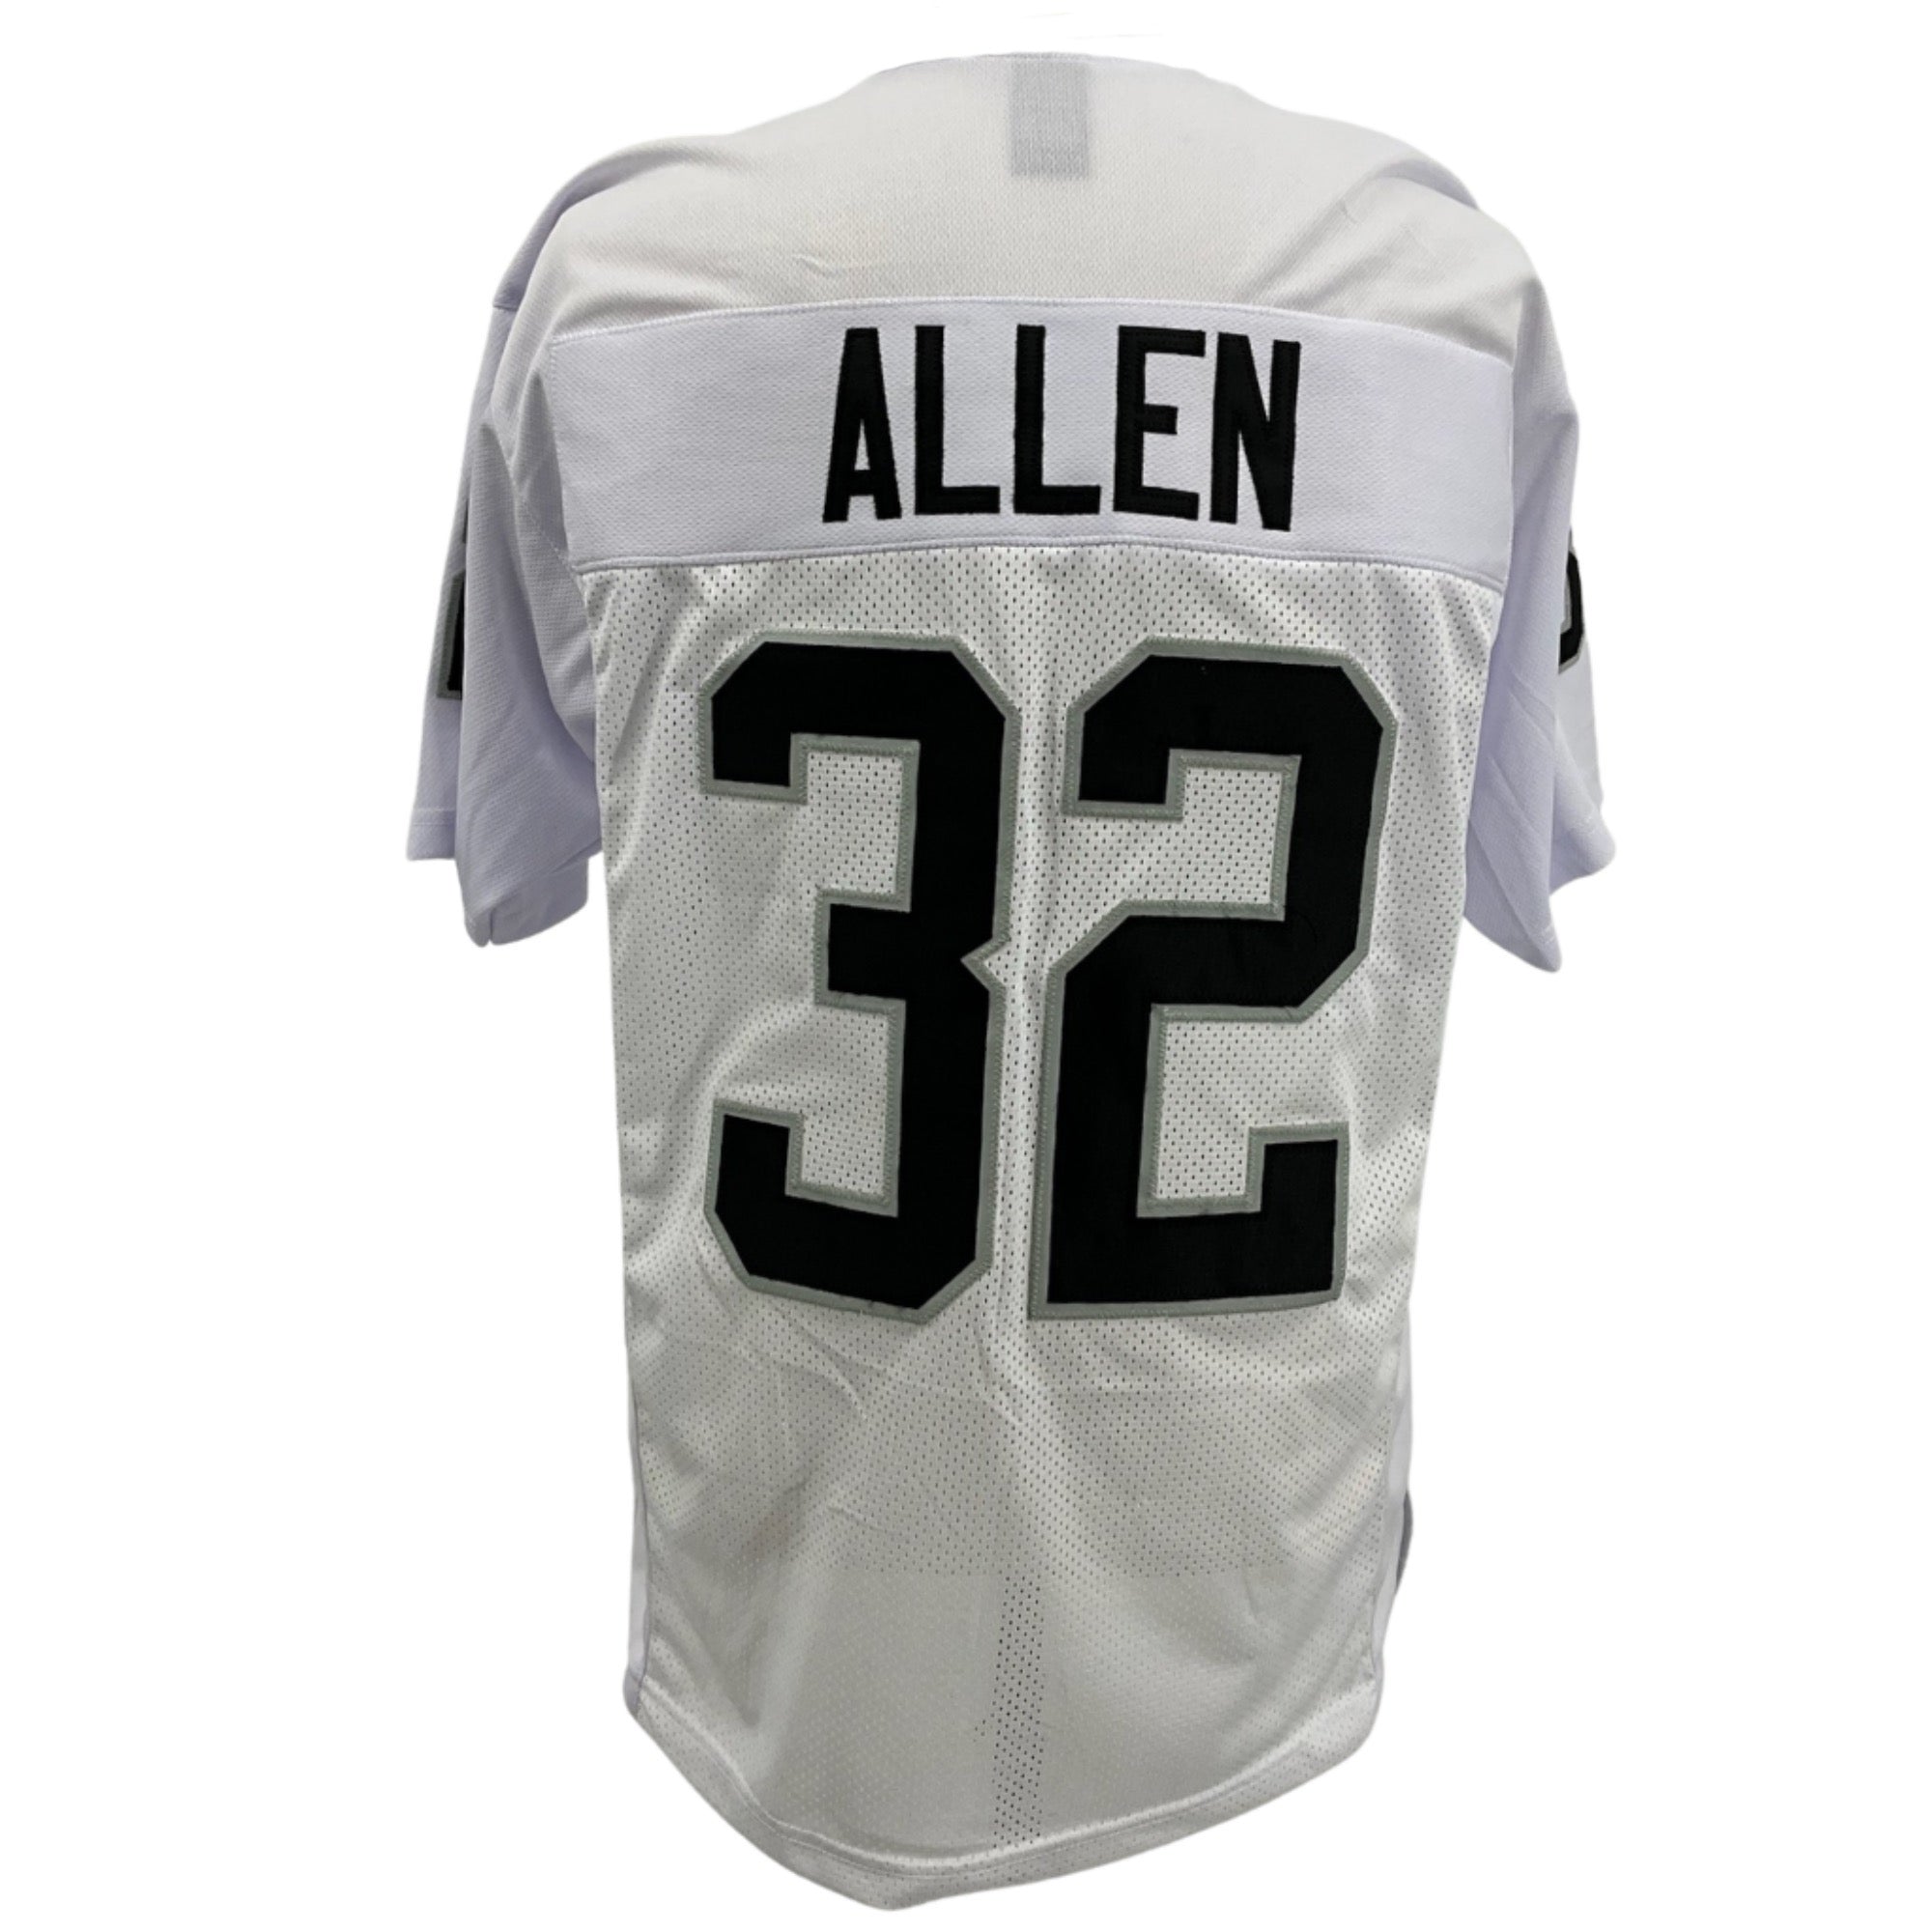 MARCUS ALLEN Los Angeles Raiders WHITE Jersey B/SL M-5XL Unsigned Sewn Stitched